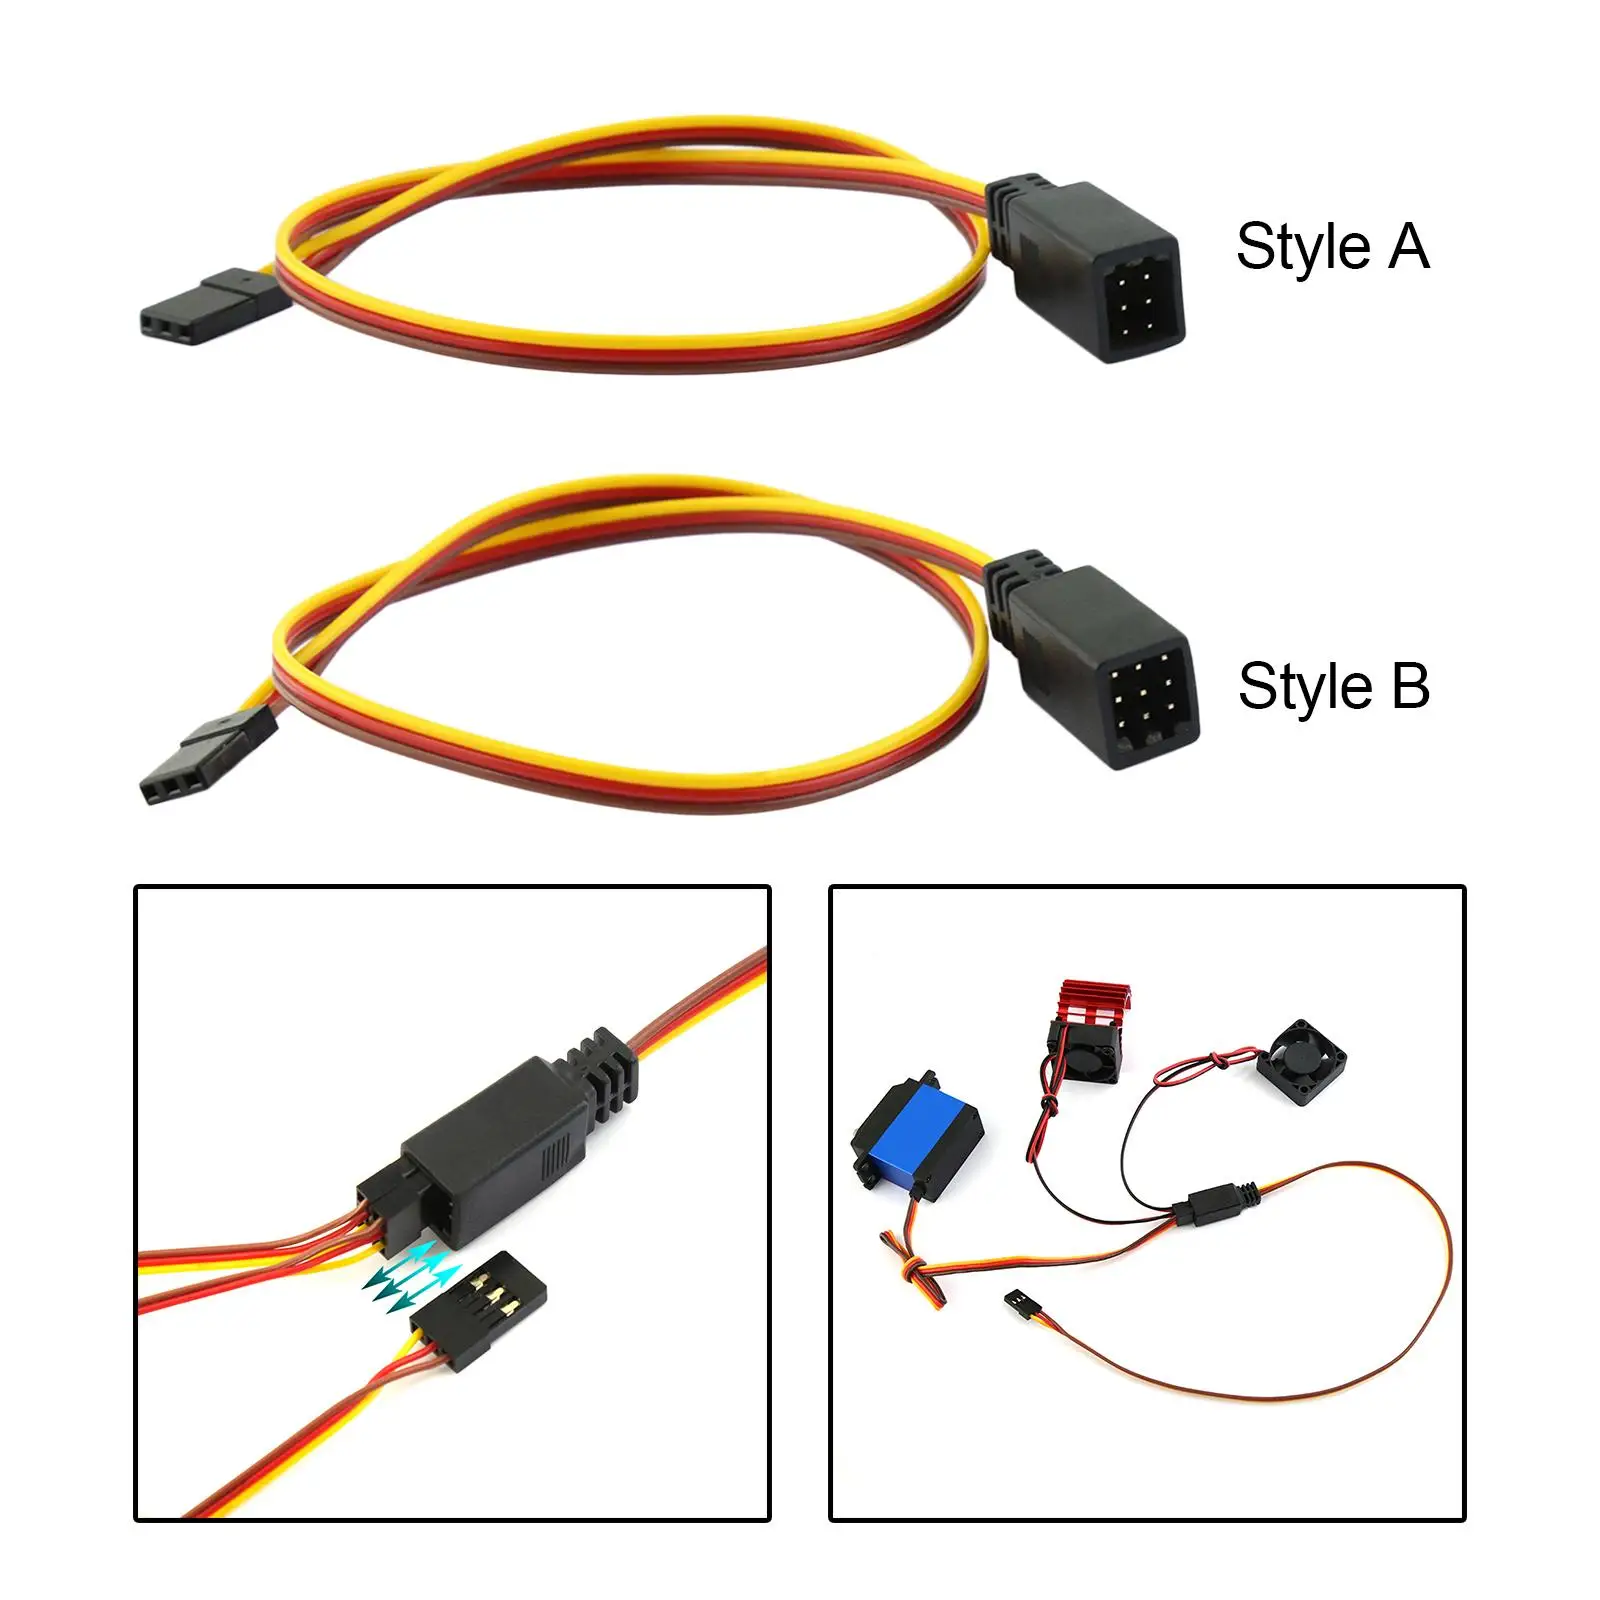 Servo Extension cable Cord JR Connector, Harness Leads Cable for RC Cars, Remote Control Vehicles Accessory